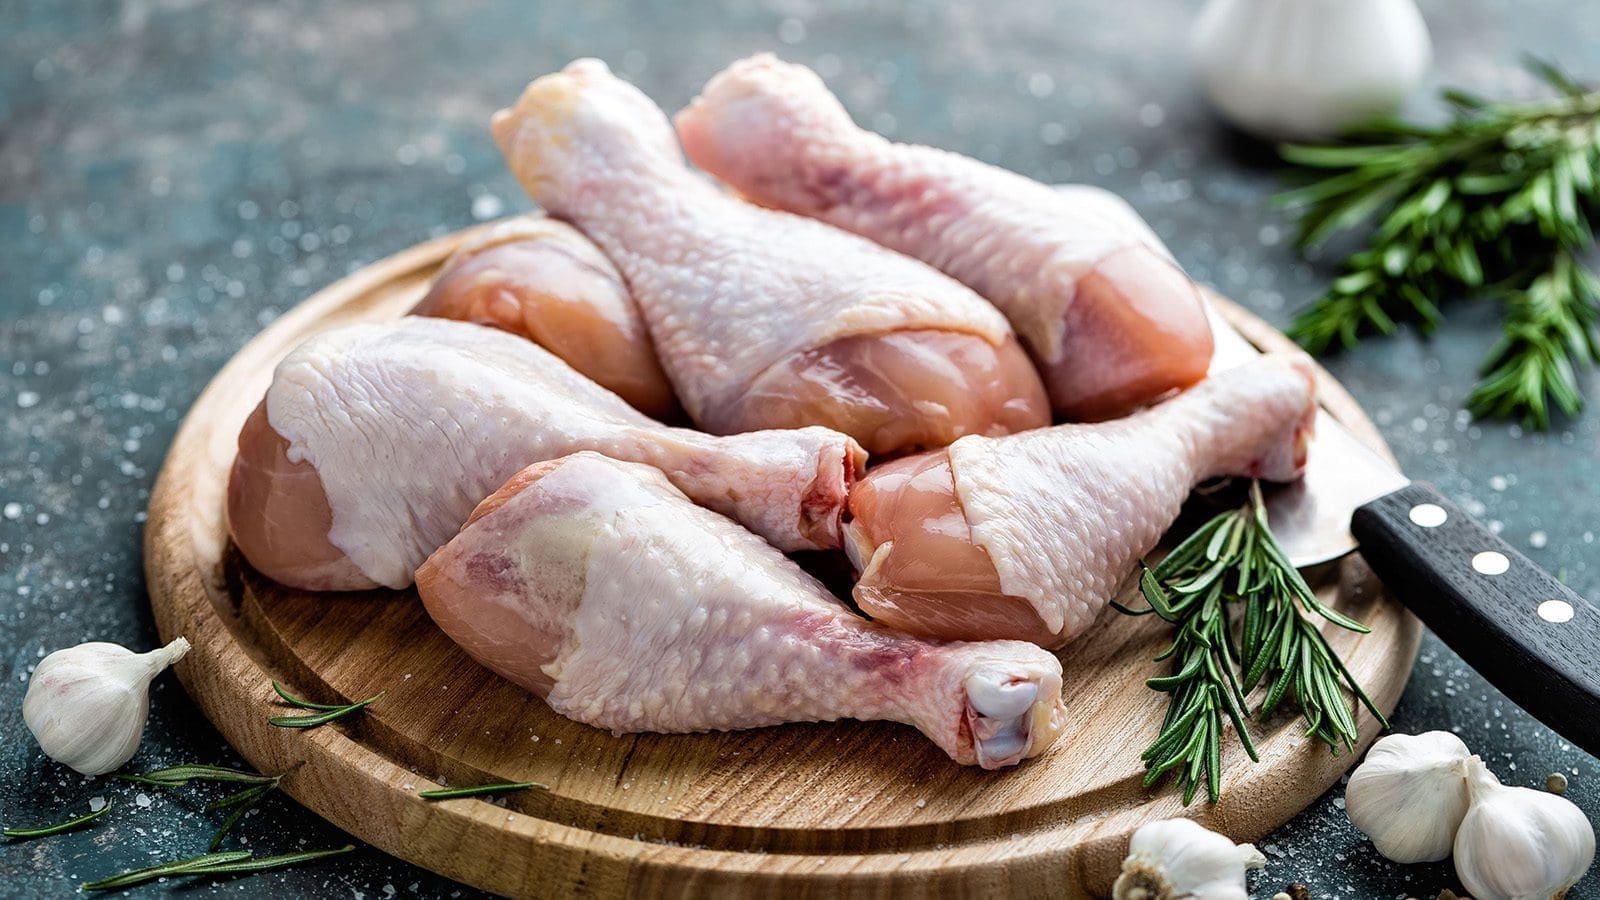 South African poultry industry to showcase signs of recovery in 2023, expected to register rise in production